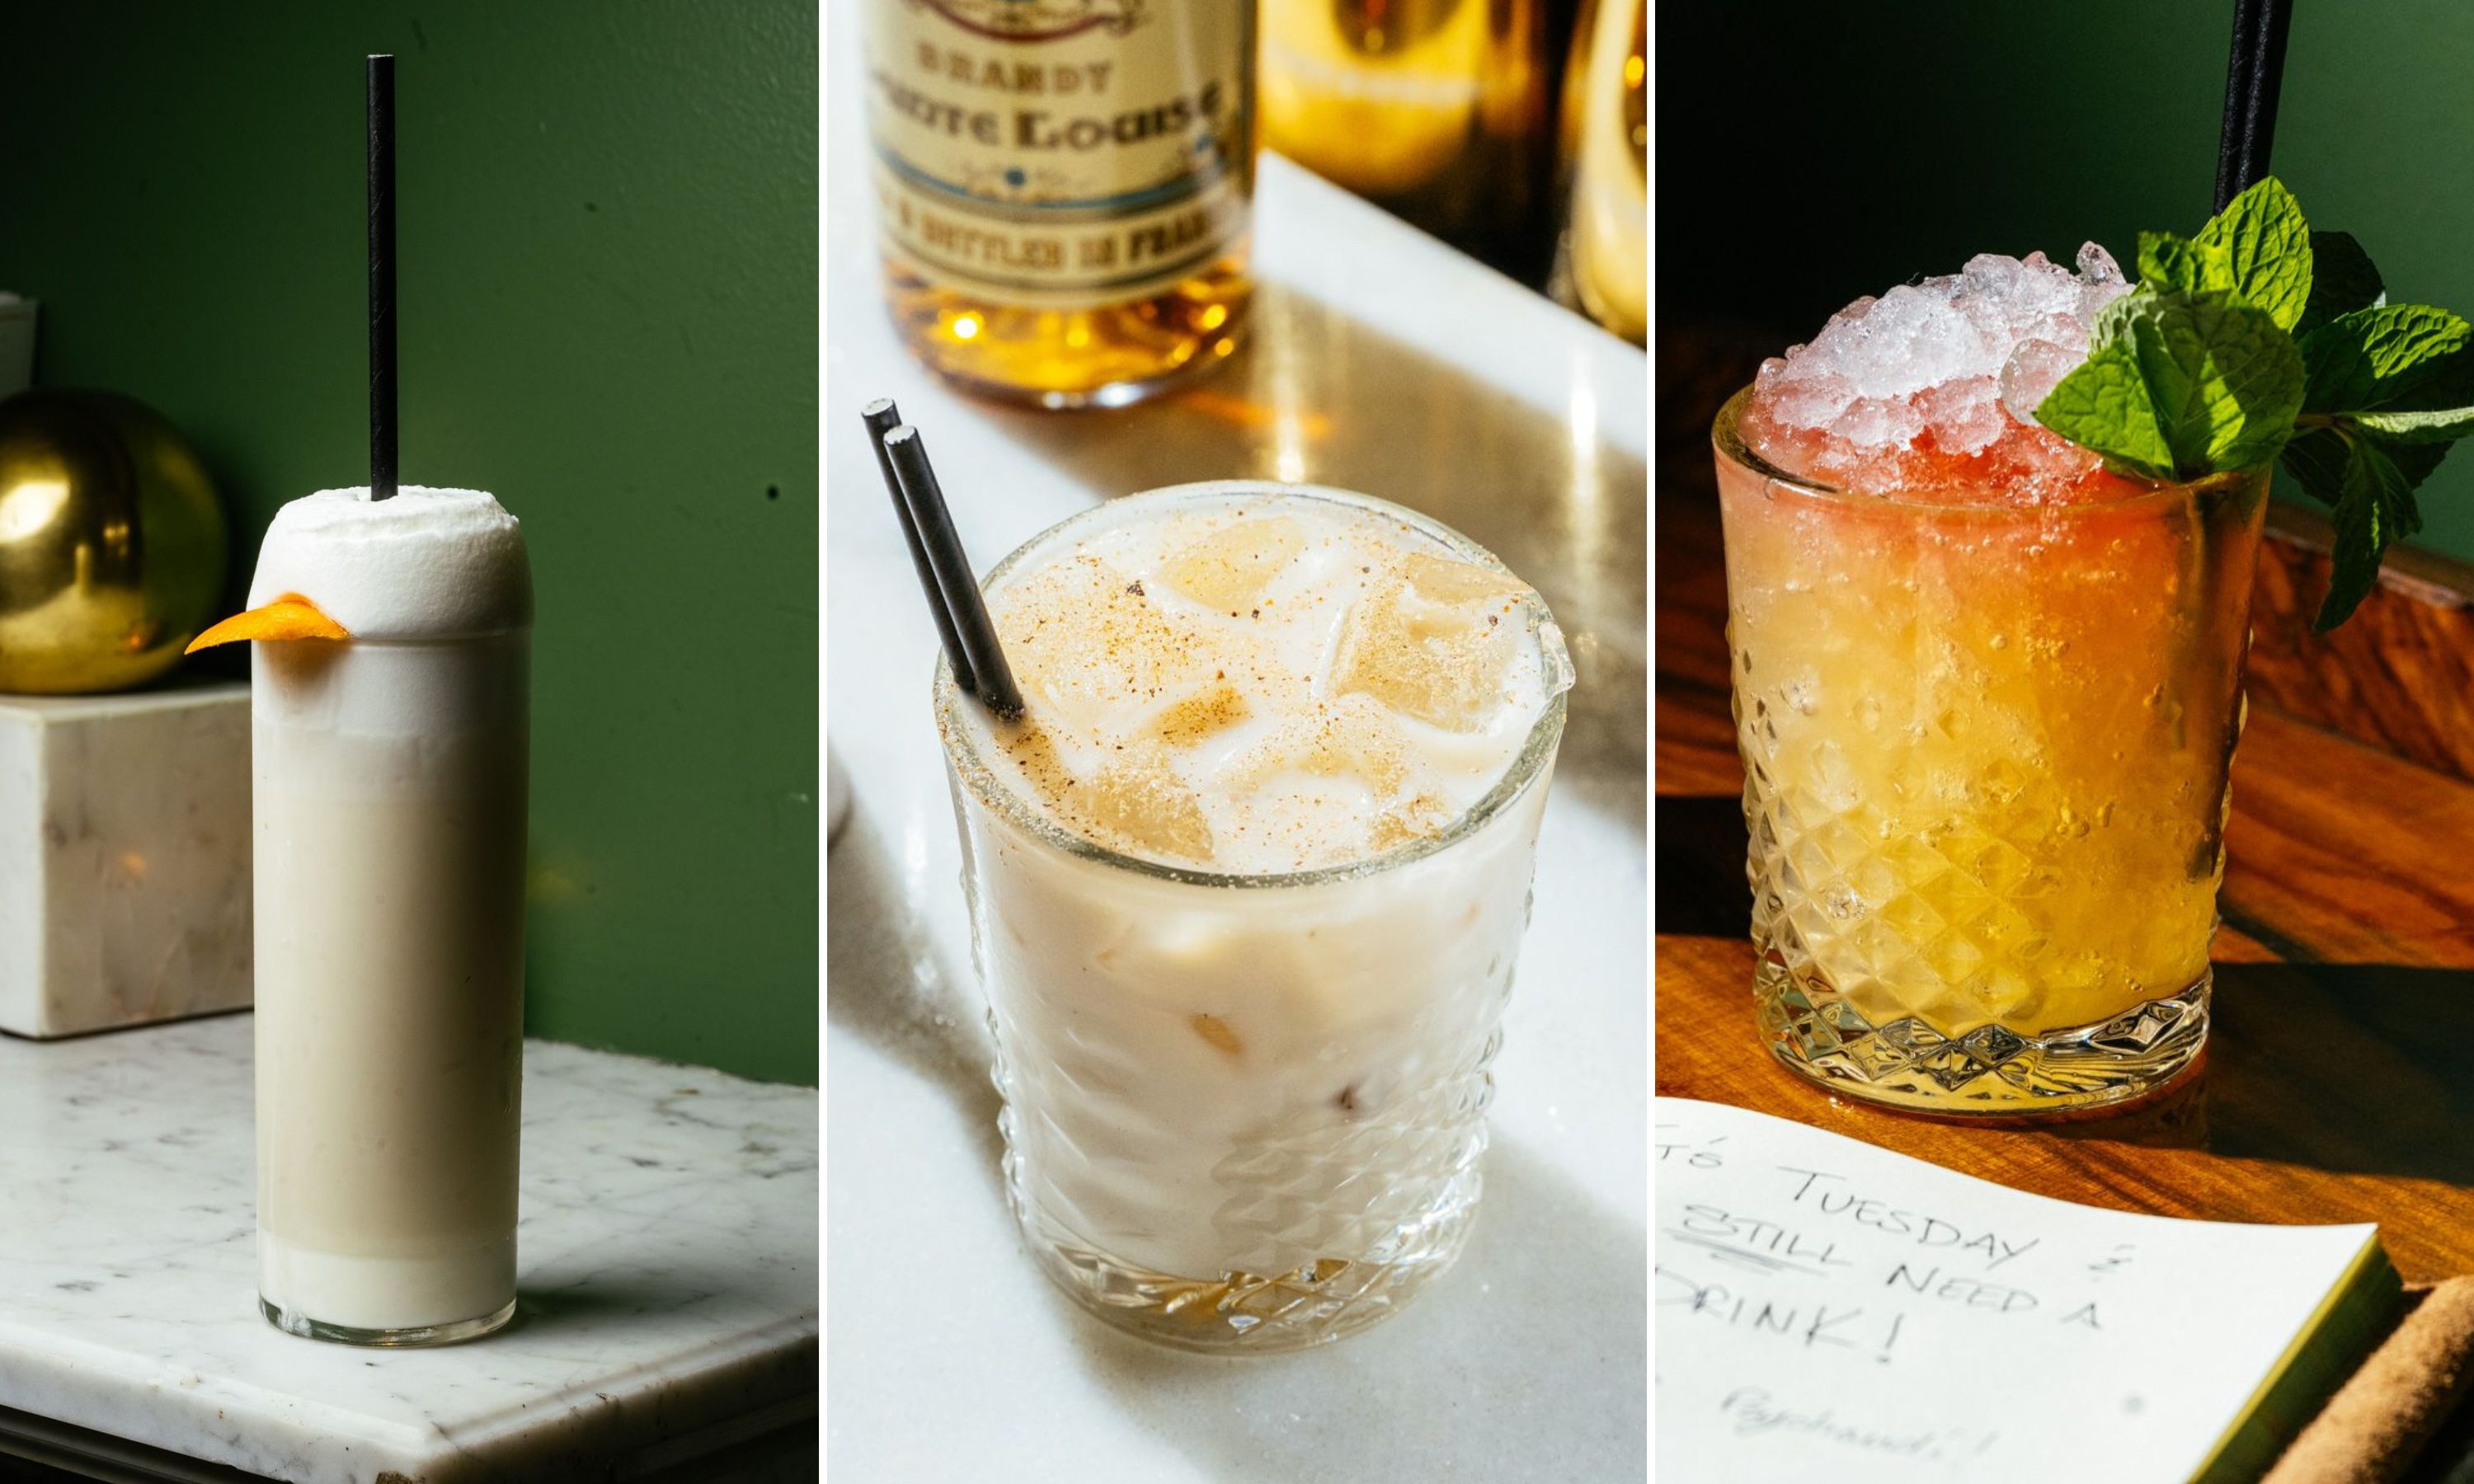 A collage of three drinks: a foamy cream drink with a tall straw in a tall glass; a milk punch with brown cinnamon dusted on top and ice; an orange and red drink with mint